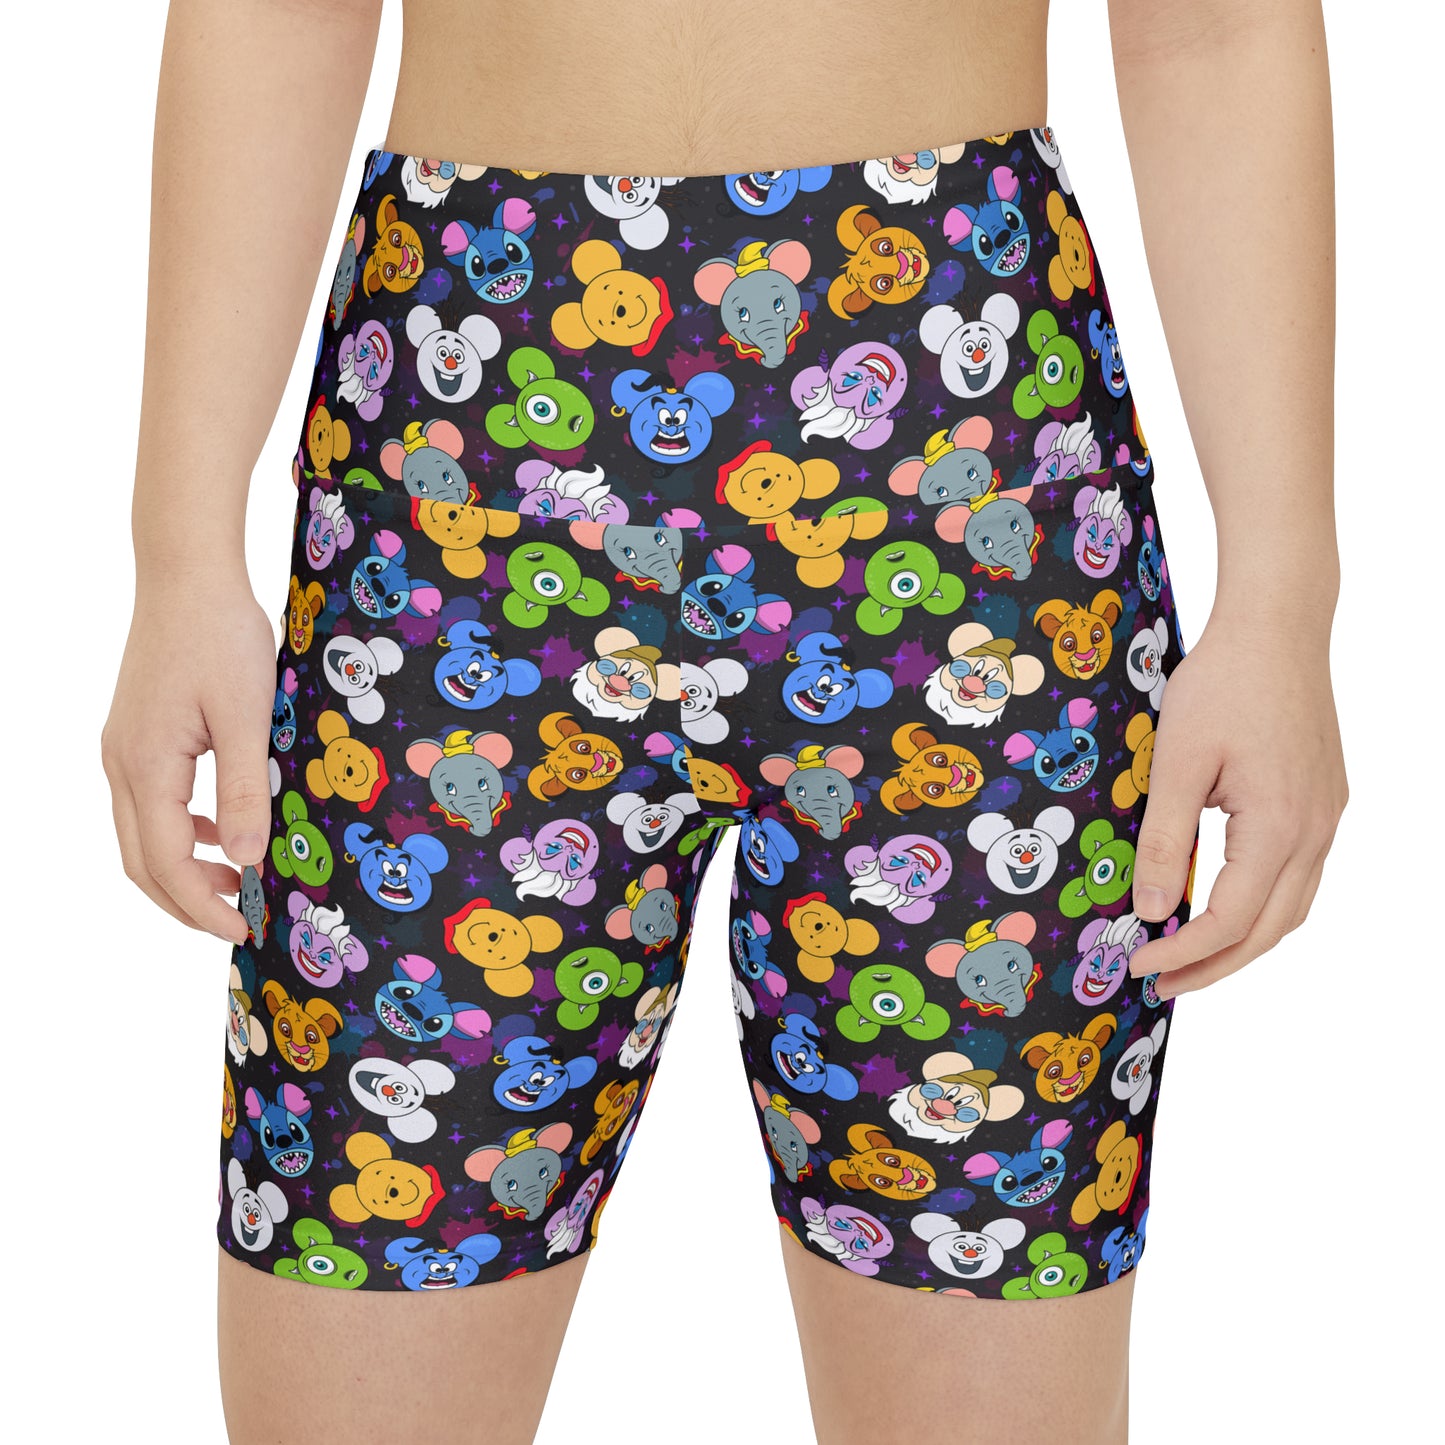 The Magical Gang Women's Athletic Workout Shorts